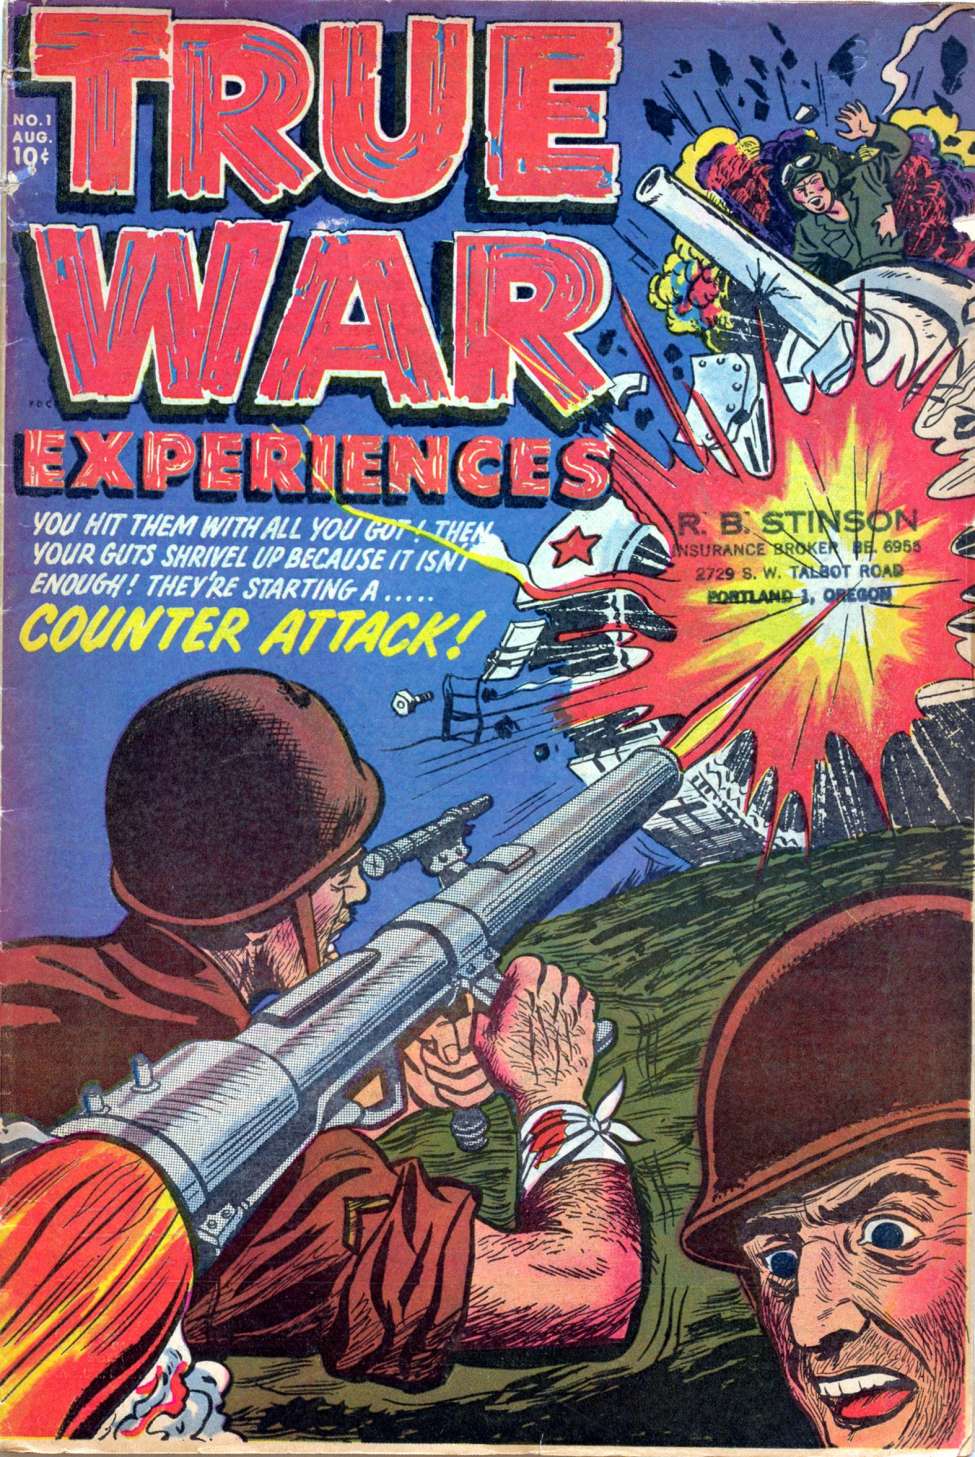 Book Cover For True War Experiences 1